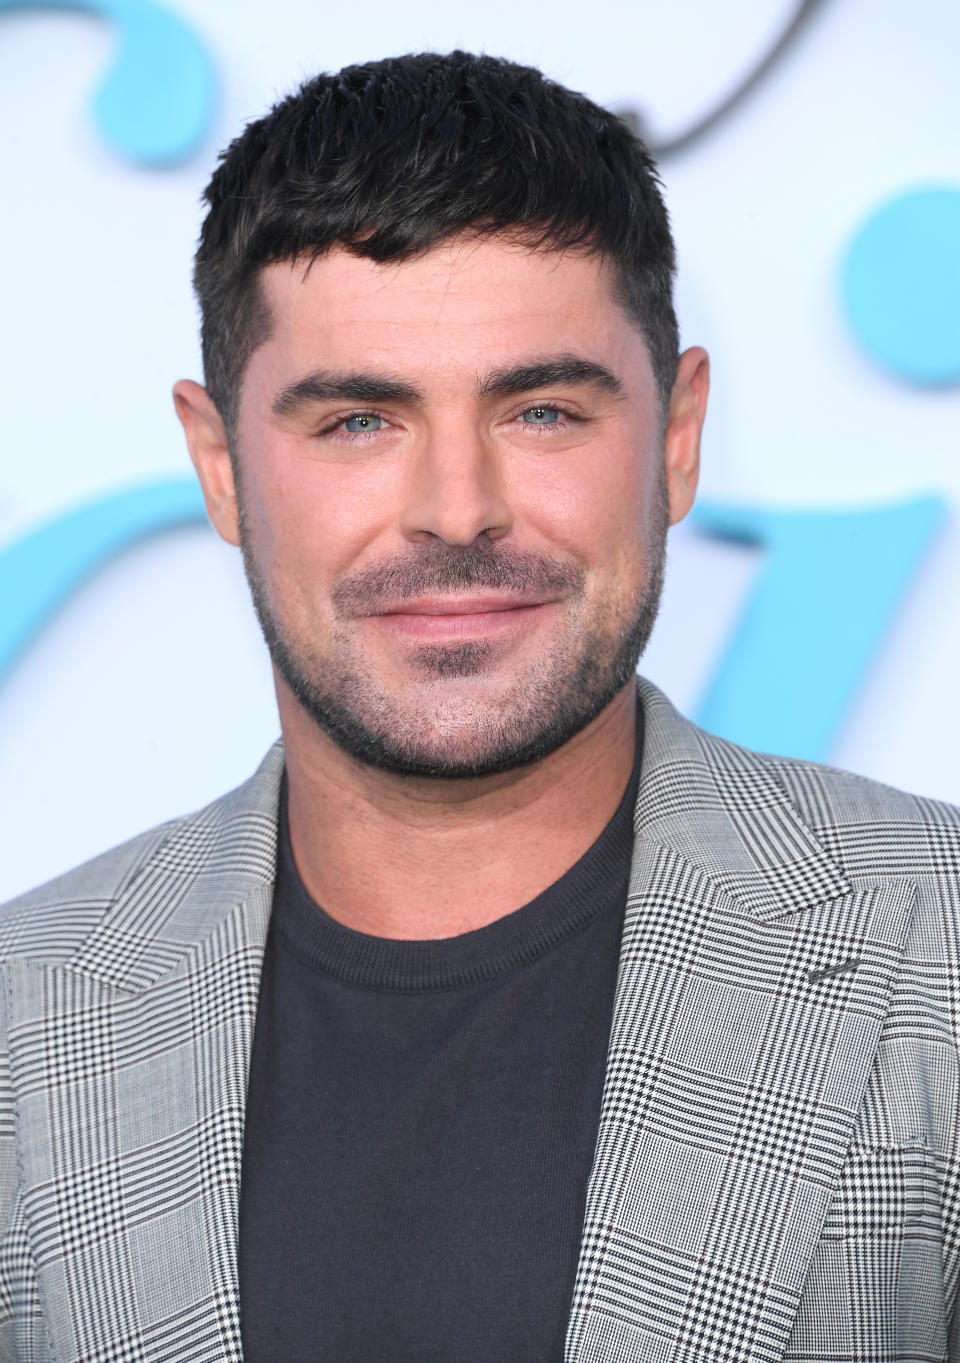 Zac Efron smiles for the camera at an event, wearing a checkered blazer over a dark shirt